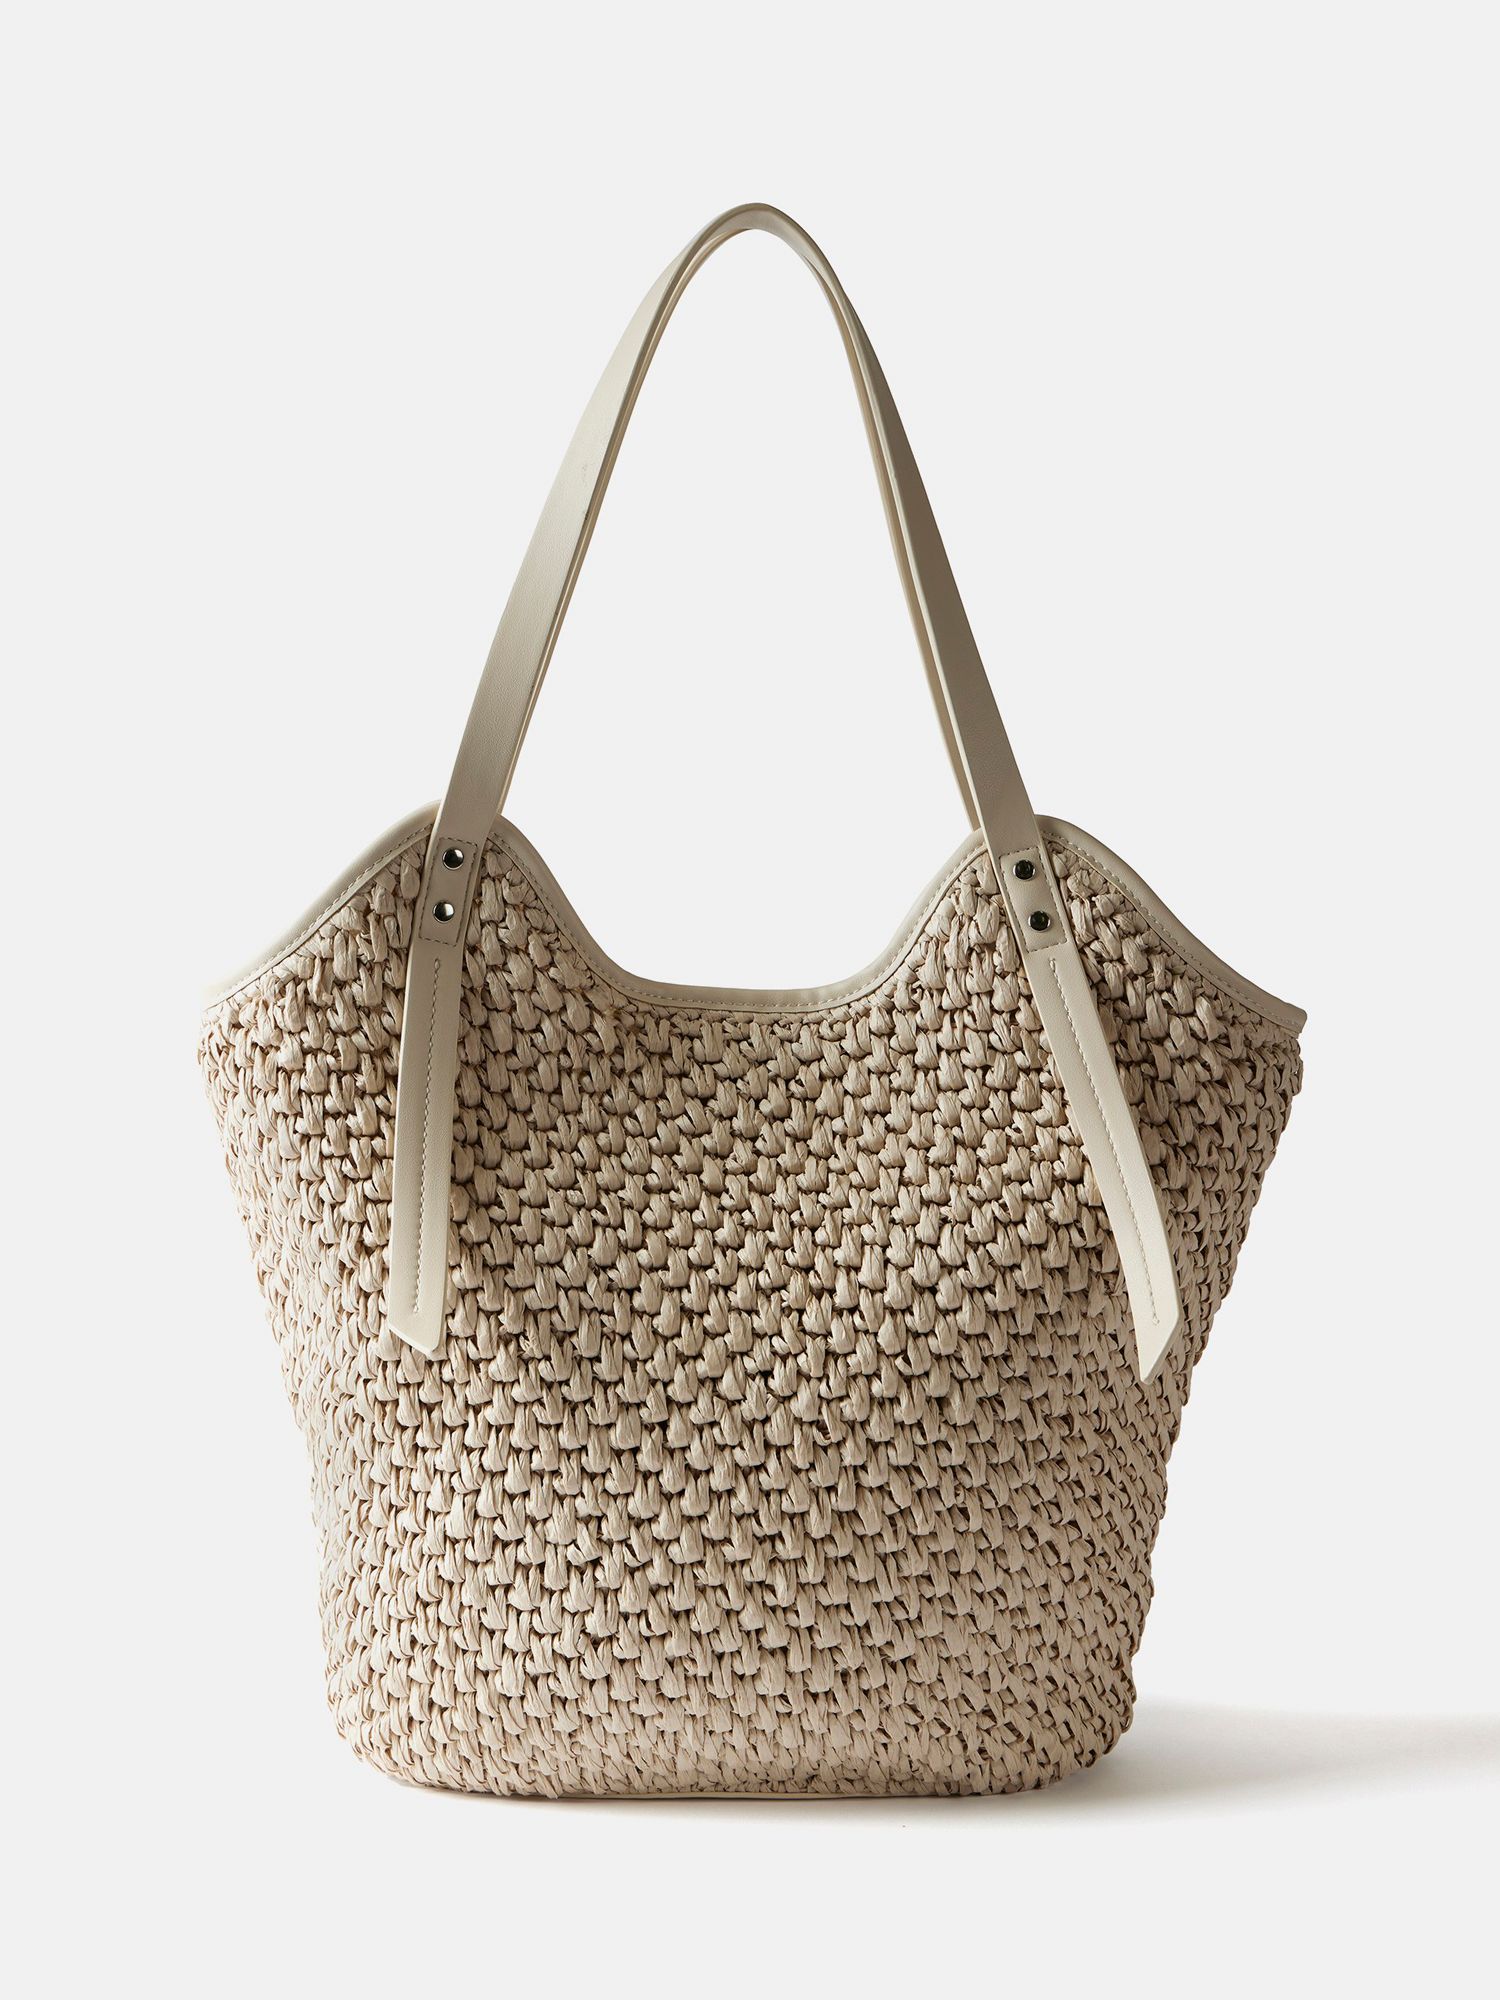 Mint Velvet Woven Tote Bag, Natural, One Size